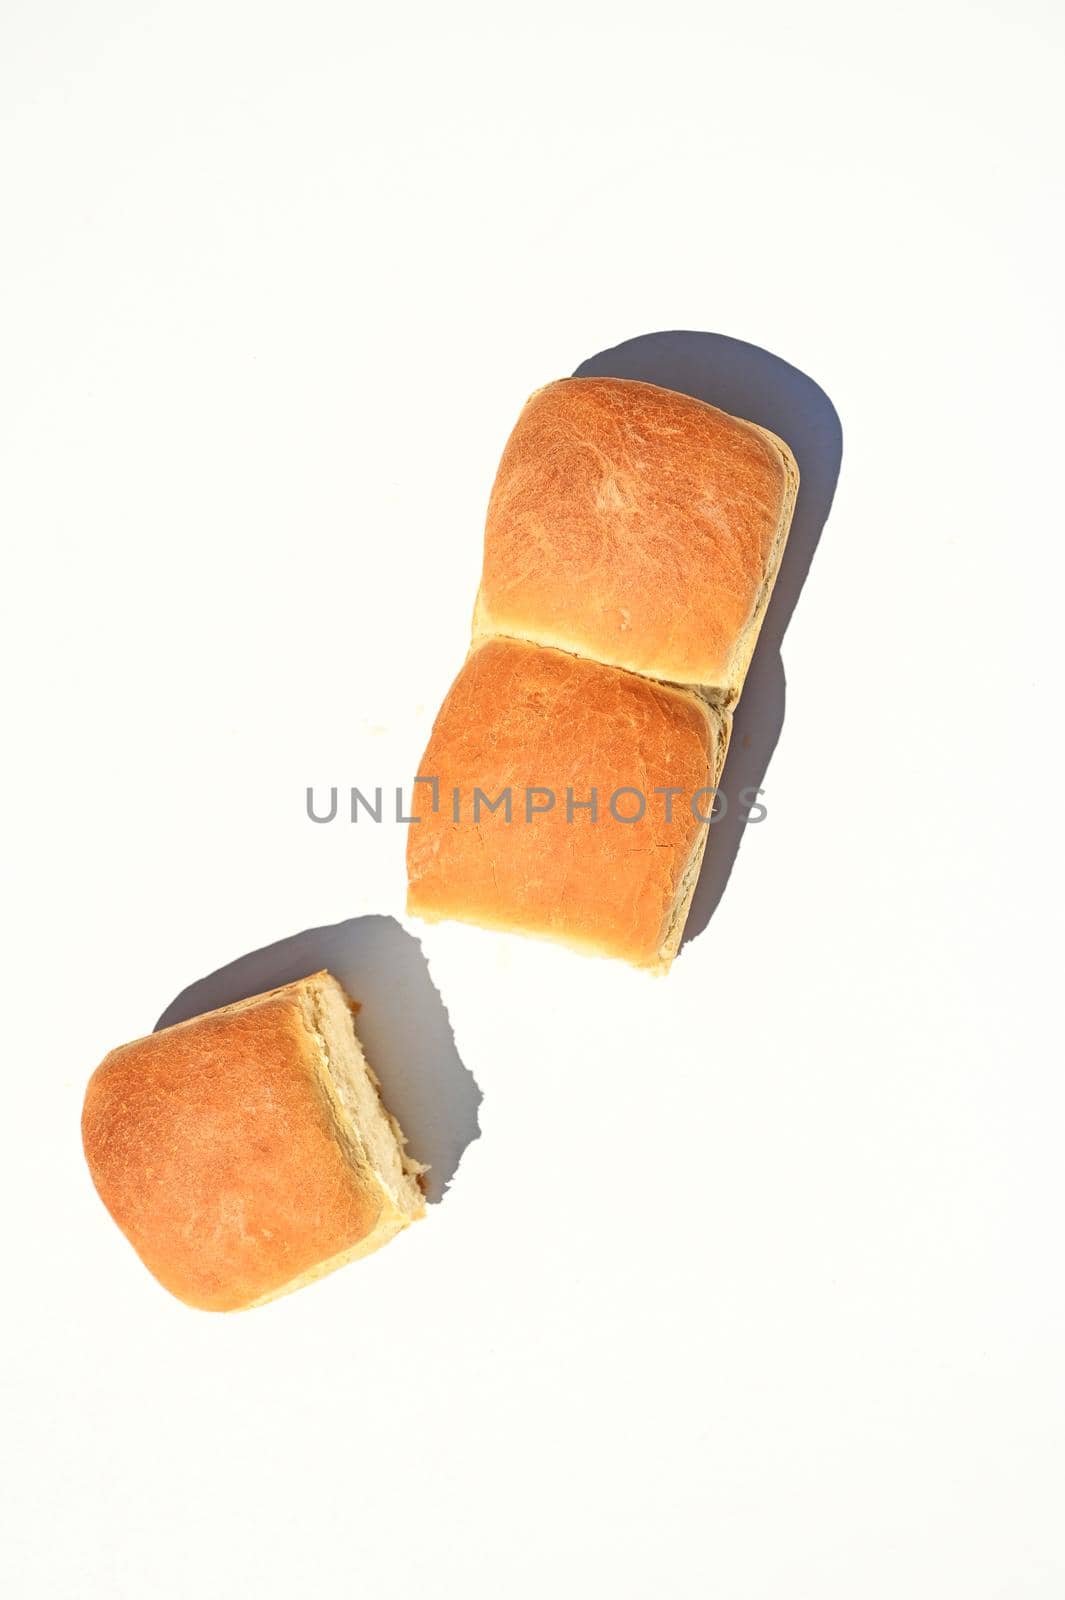 Fresh baked whole grain buns on a white background with copy ad space. Food background. Still life by artgf